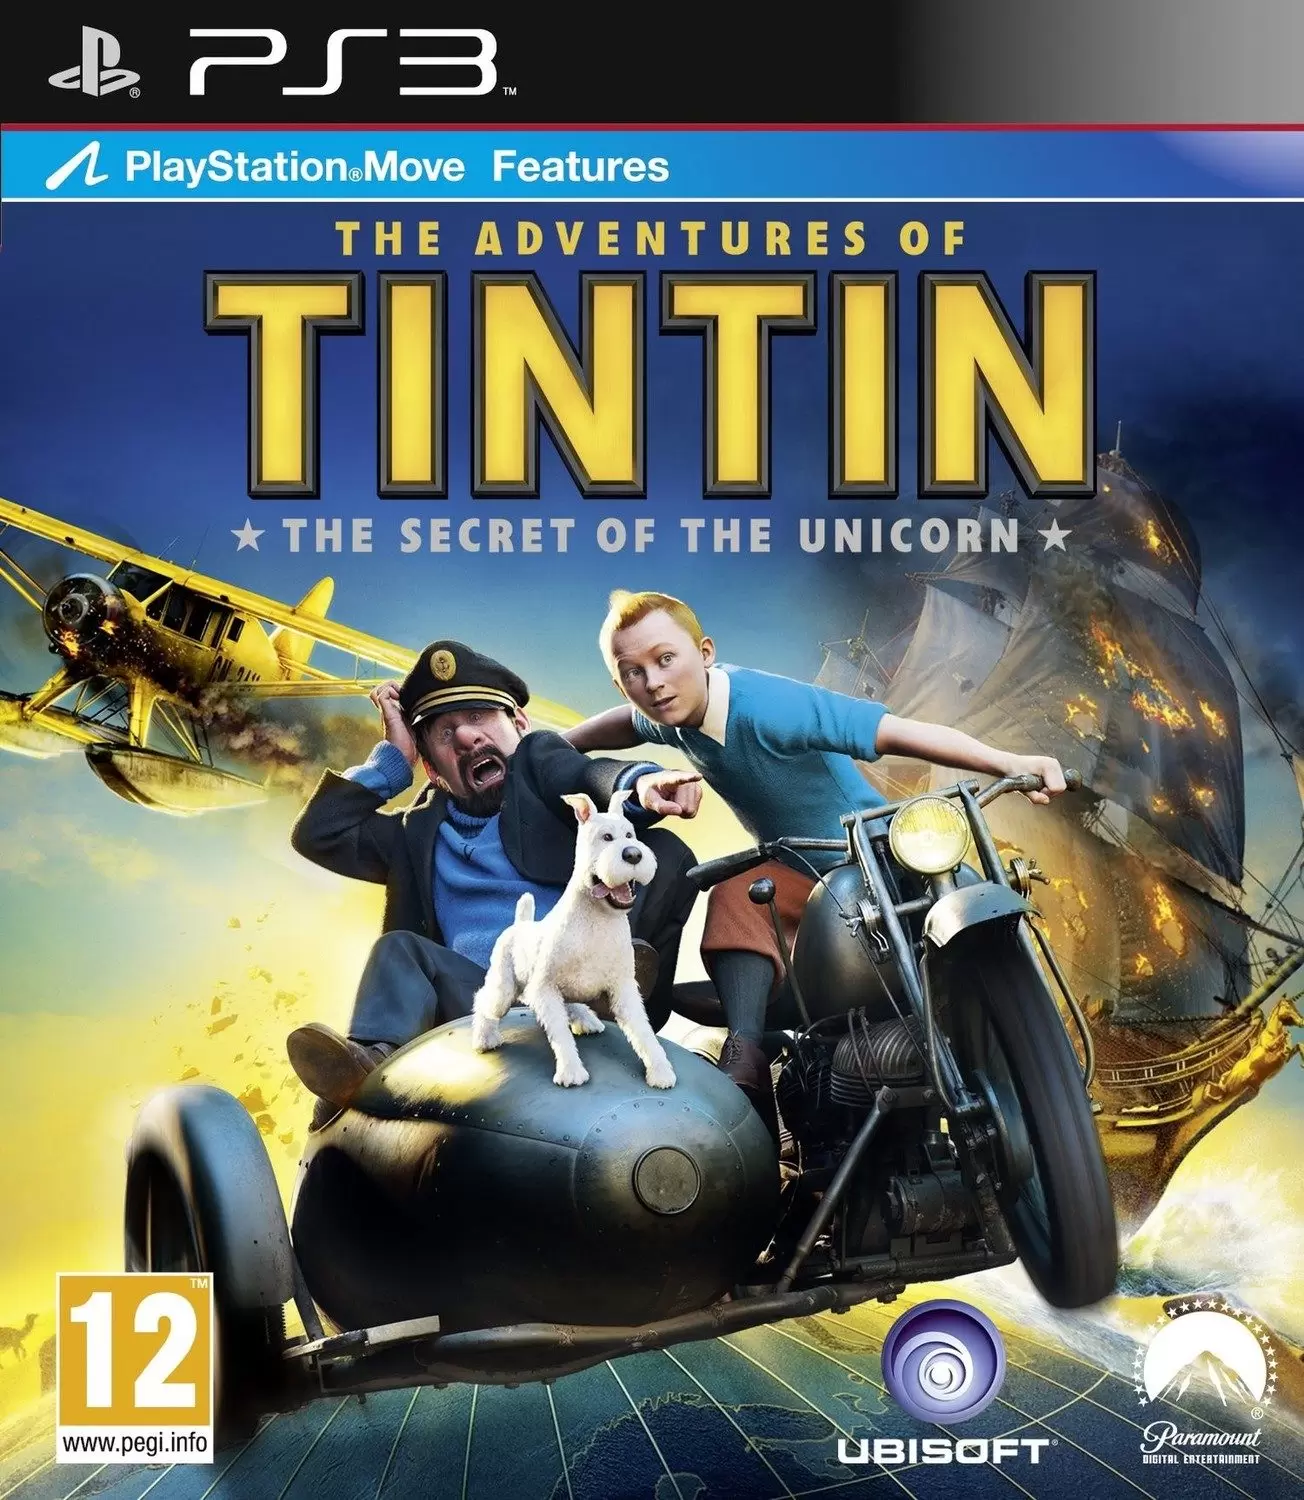 PS3 Games - The Adventures of Tintin: The Game